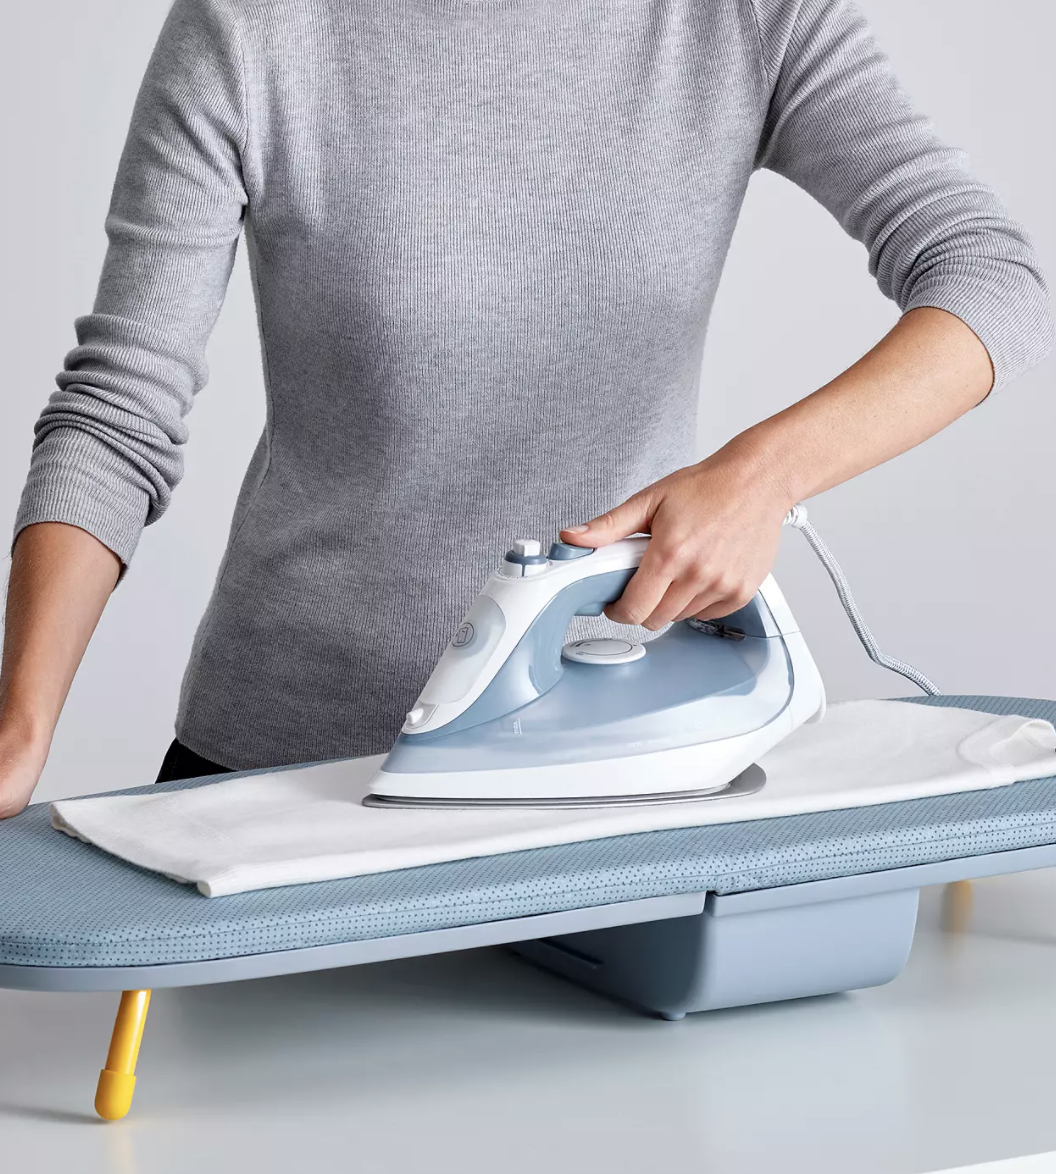 The space-saver gadget takes all the hassel out of ironing. (Joseph Joseph)